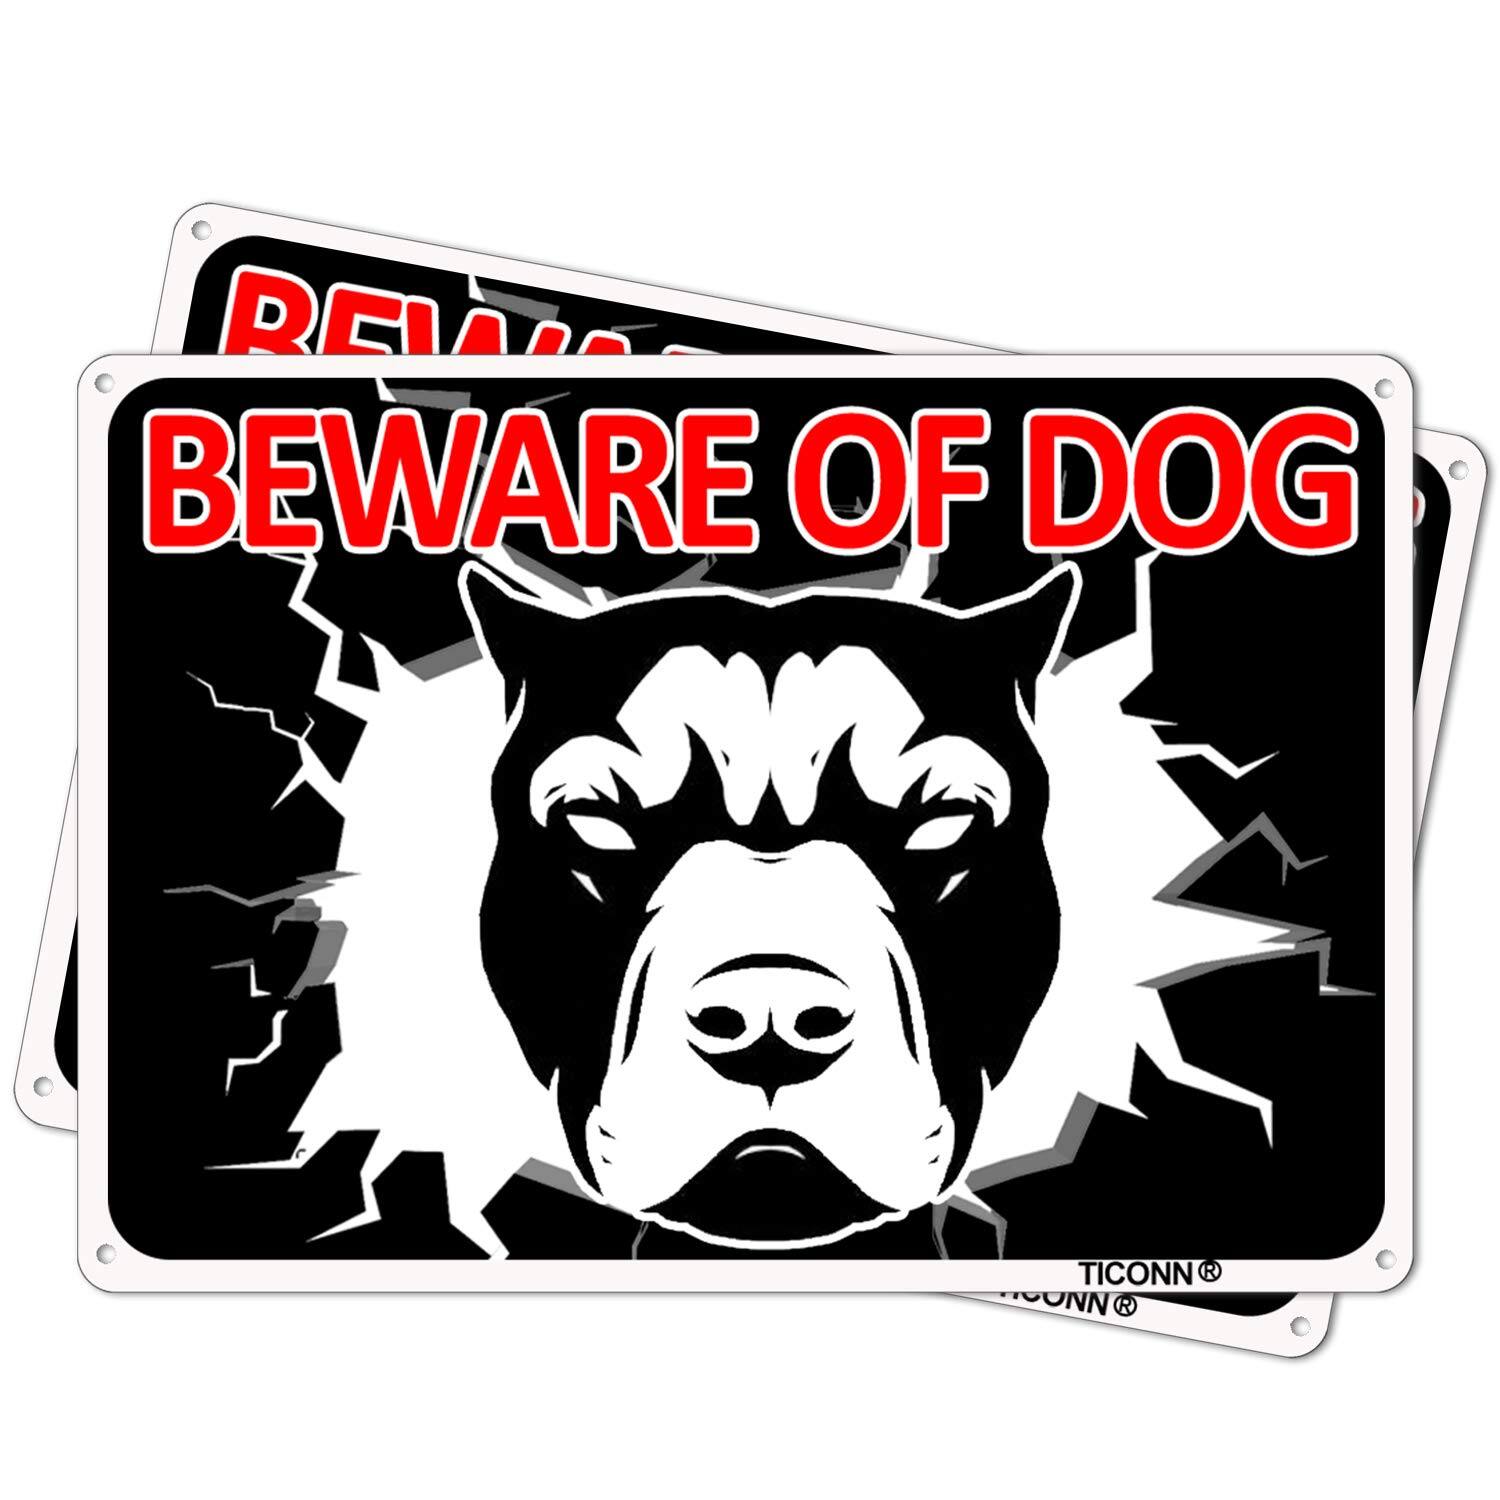 25% Off Various Aluminum Security Signs from $5.99 + FS with PRIME